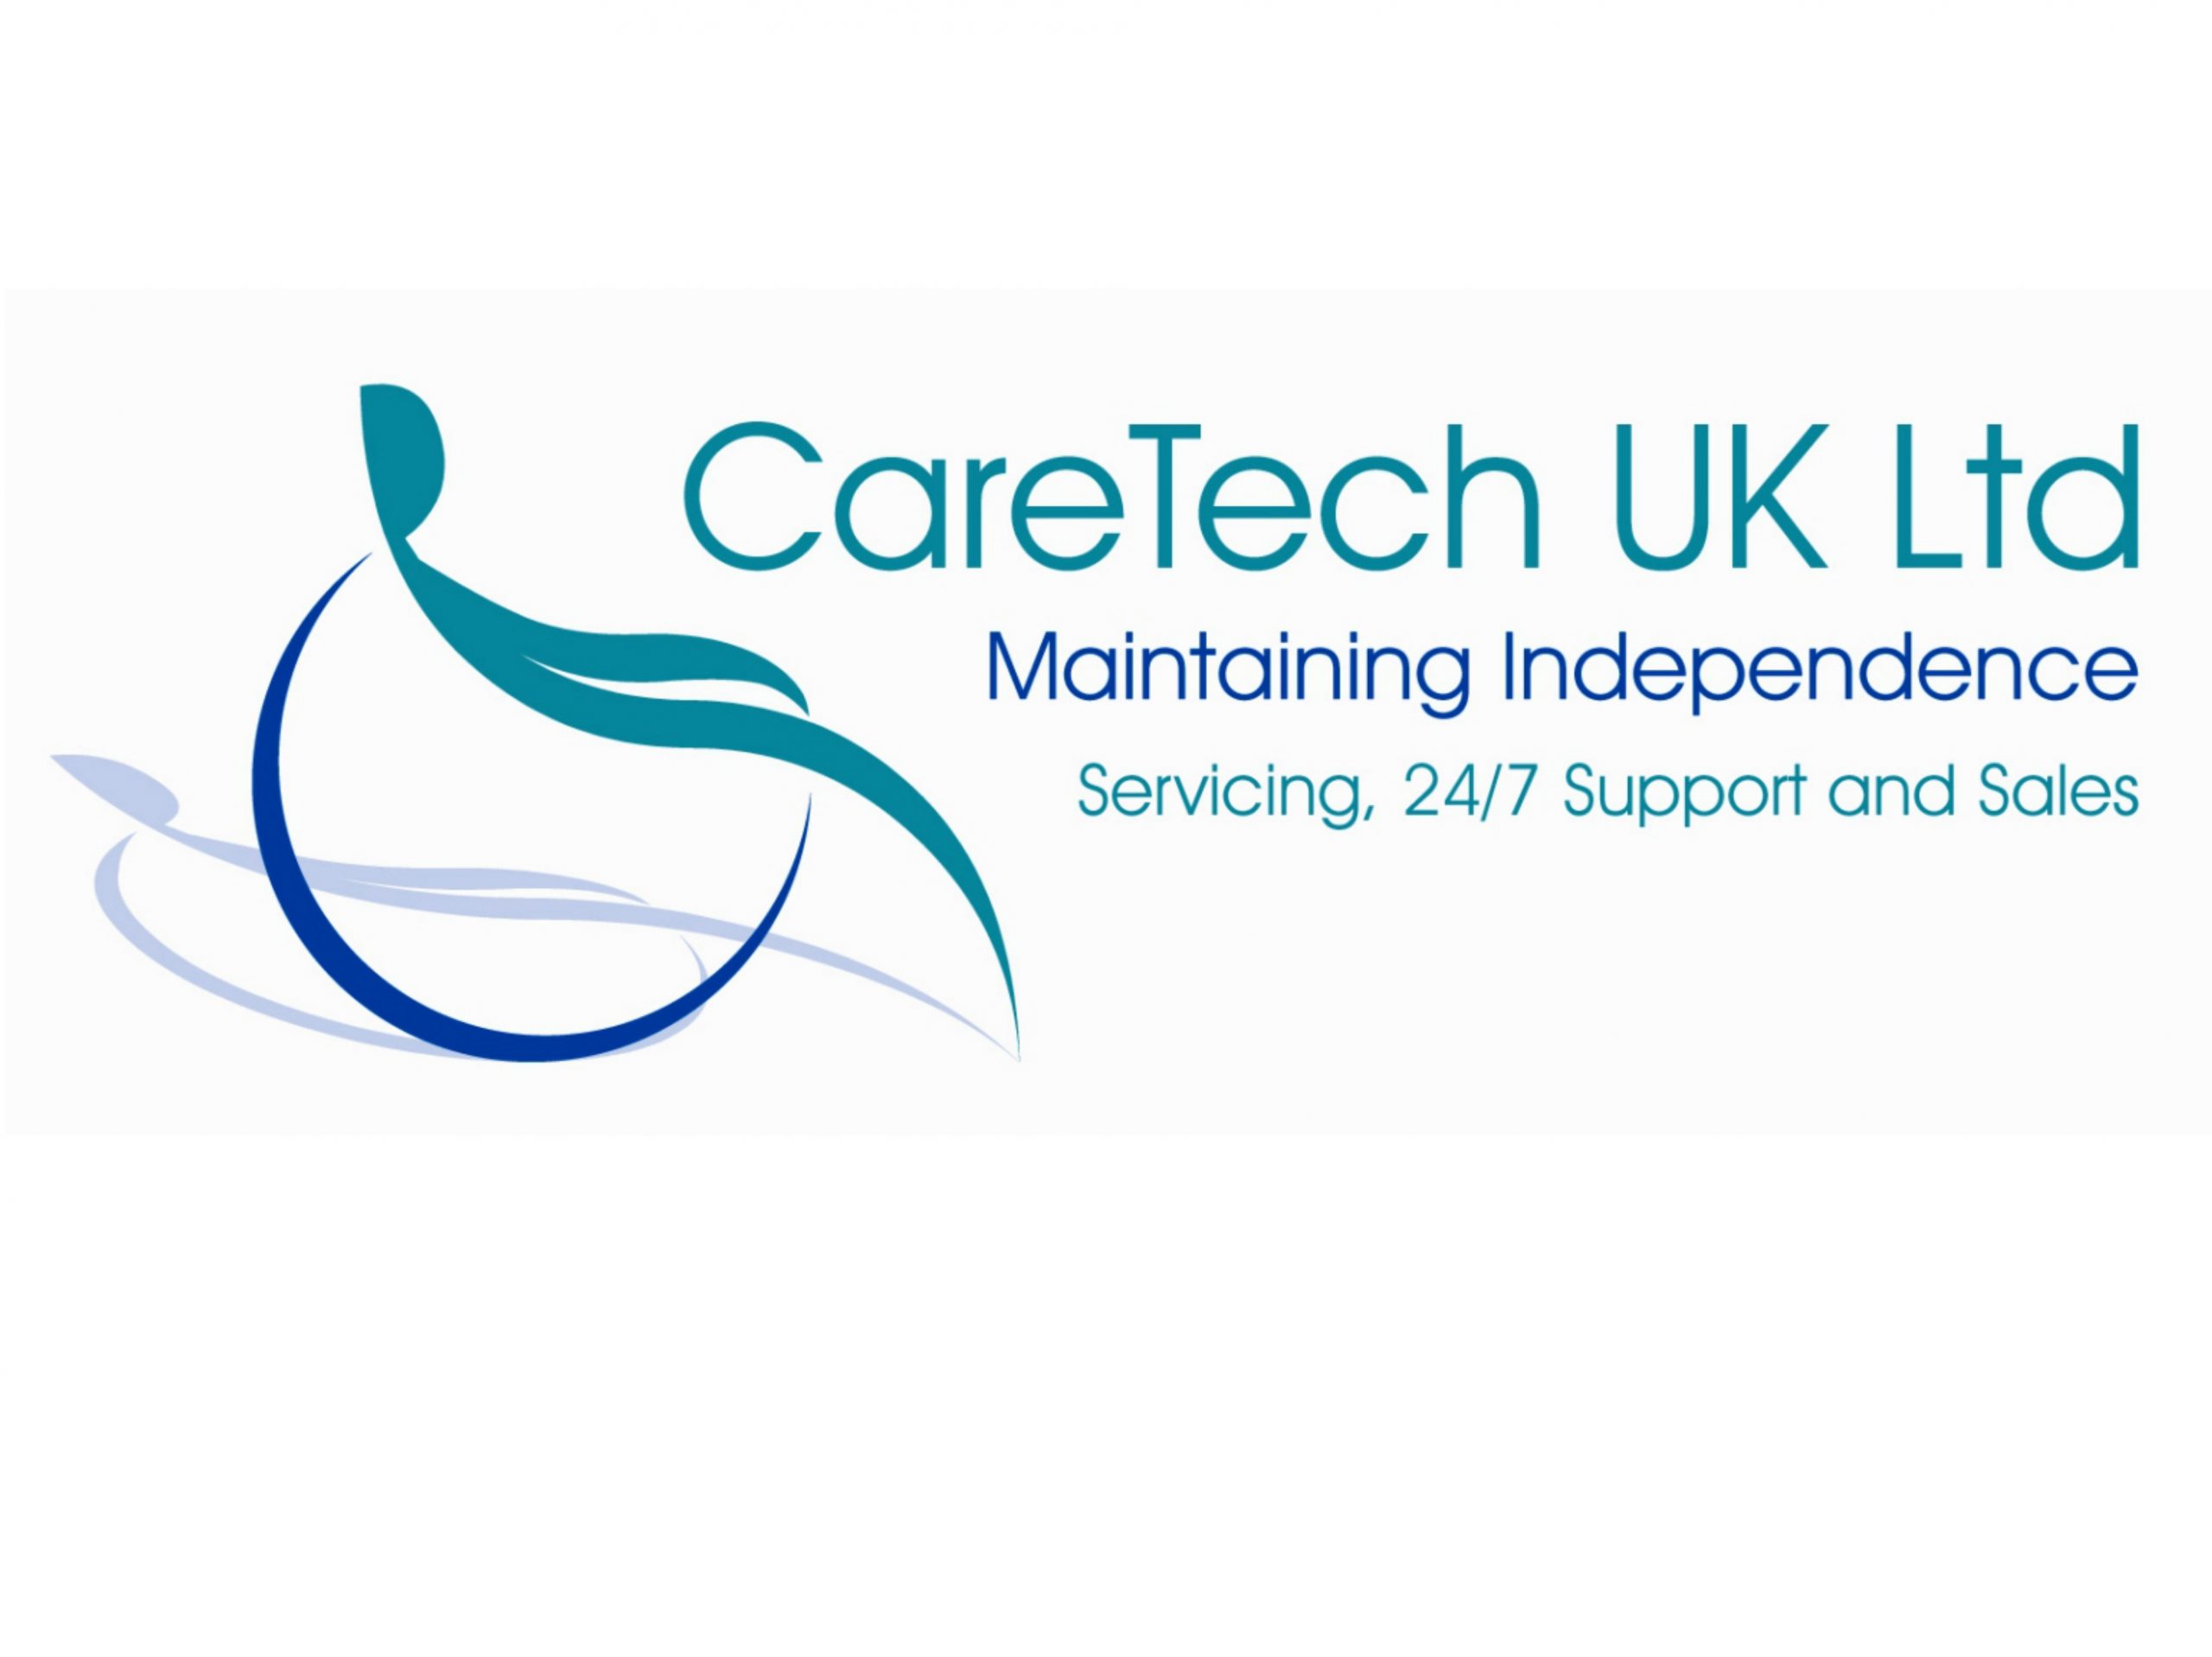 Caretech Support Community Store with Weekend Deliveries